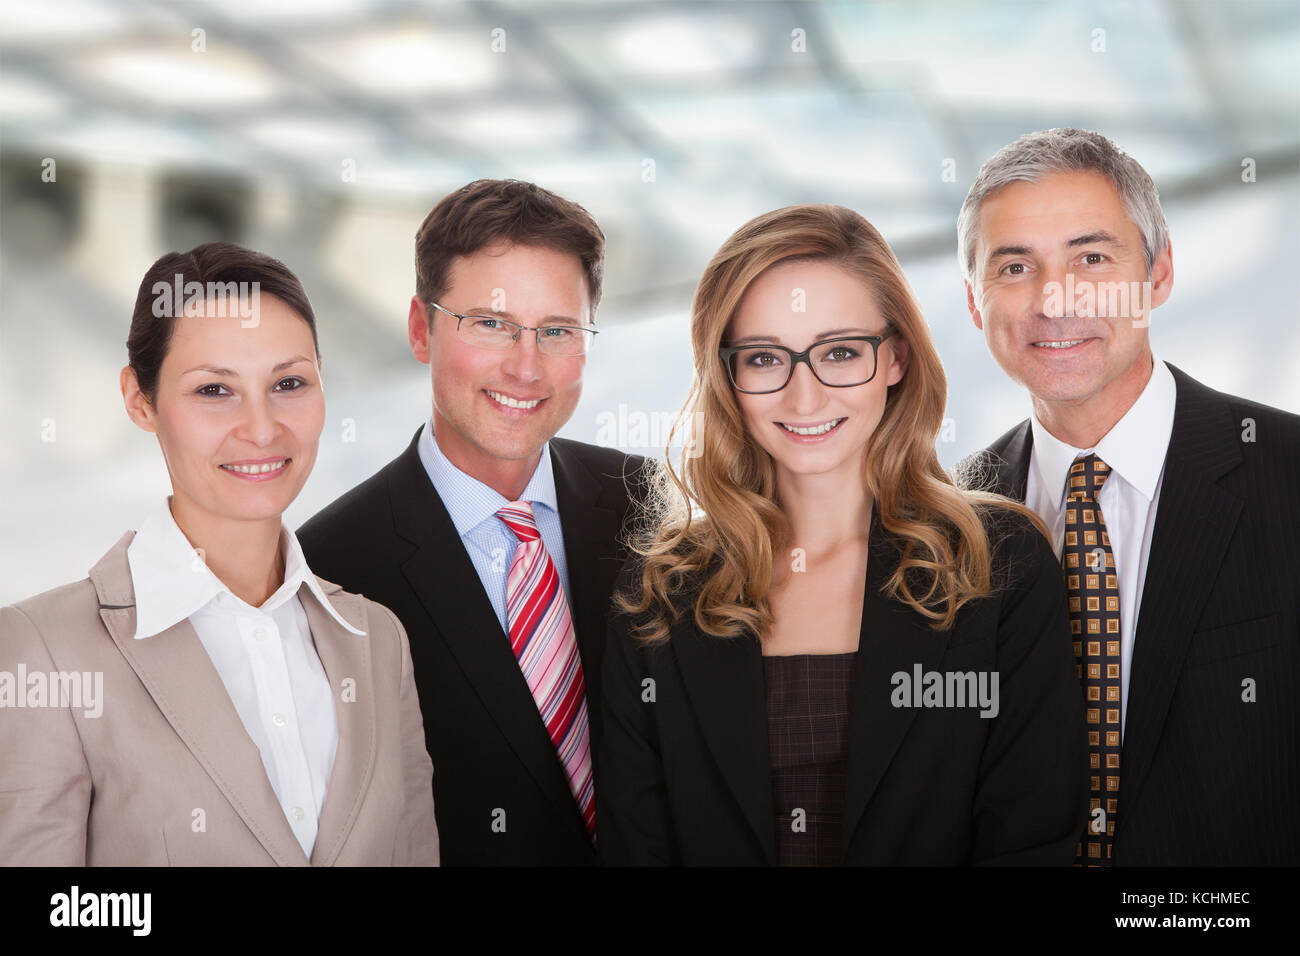 Smiling group of stylish business professionals standing in a row with their arms folded Stock Photo